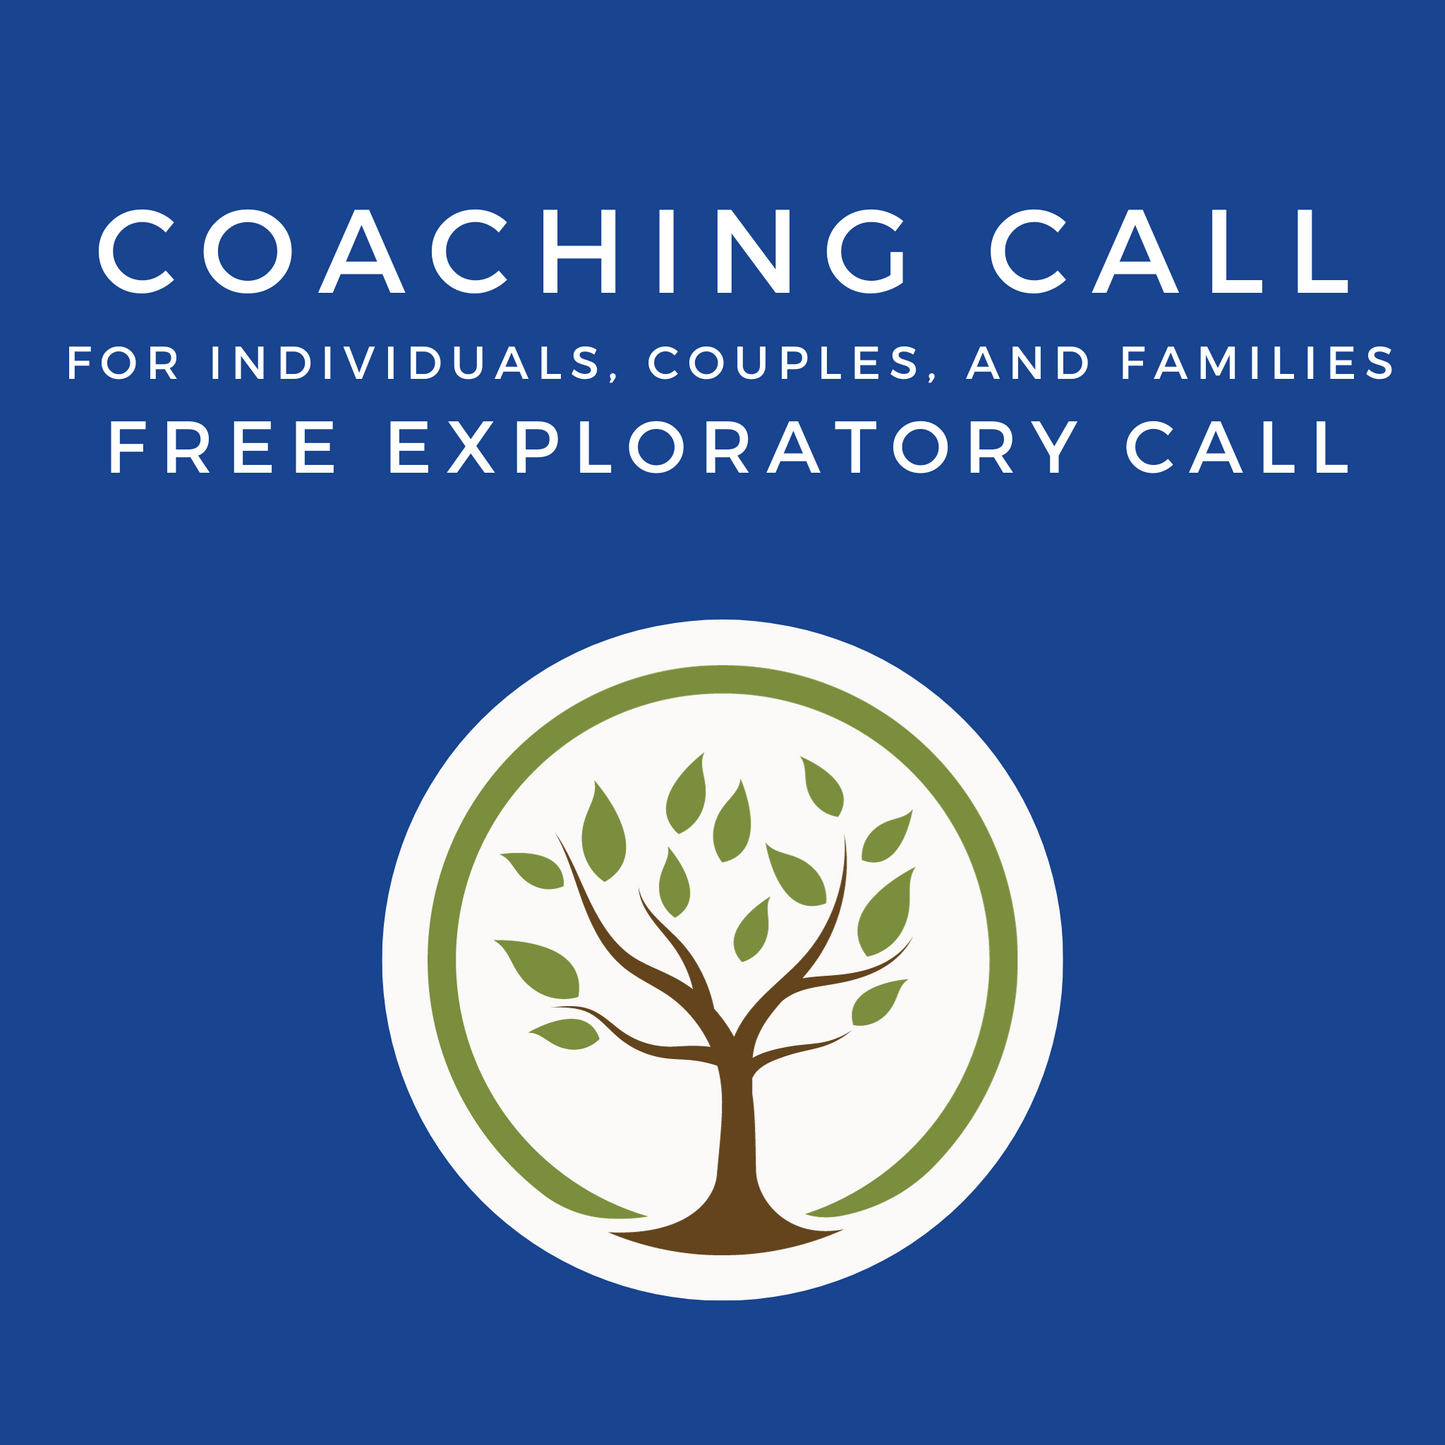 Free Exploratory Call for Coaching (15 minutes)